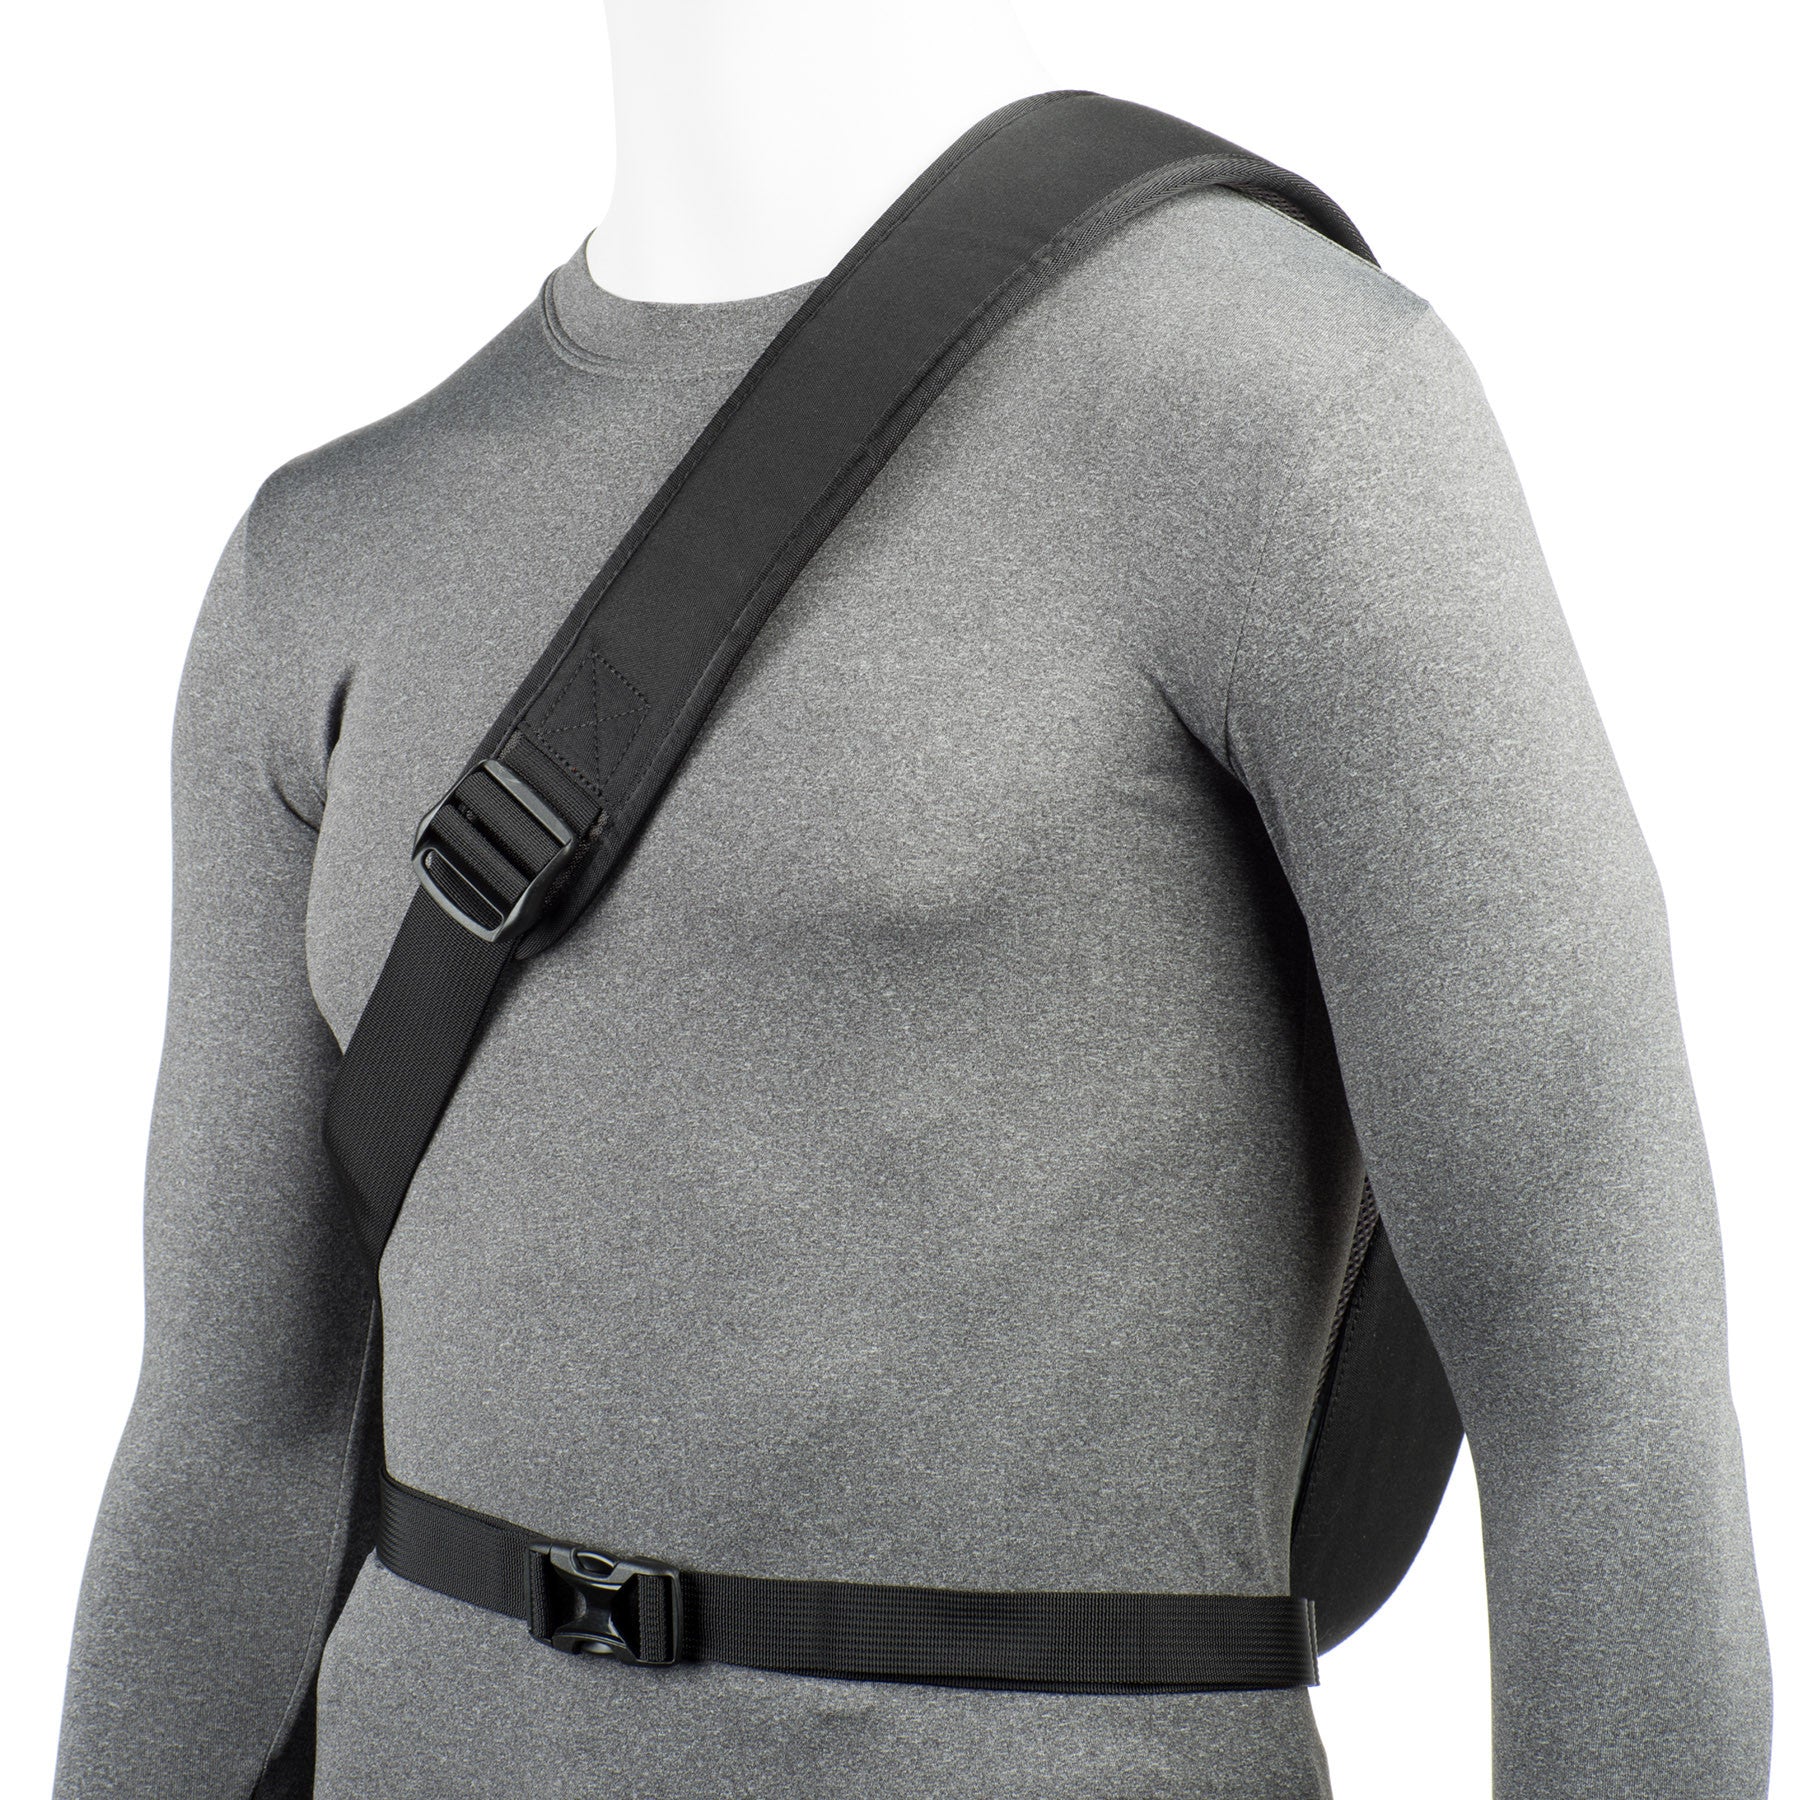 Slim, contoured, body-conforming design with a wide shoulder strap provides a very comfortable fit Lightweight materials and construction